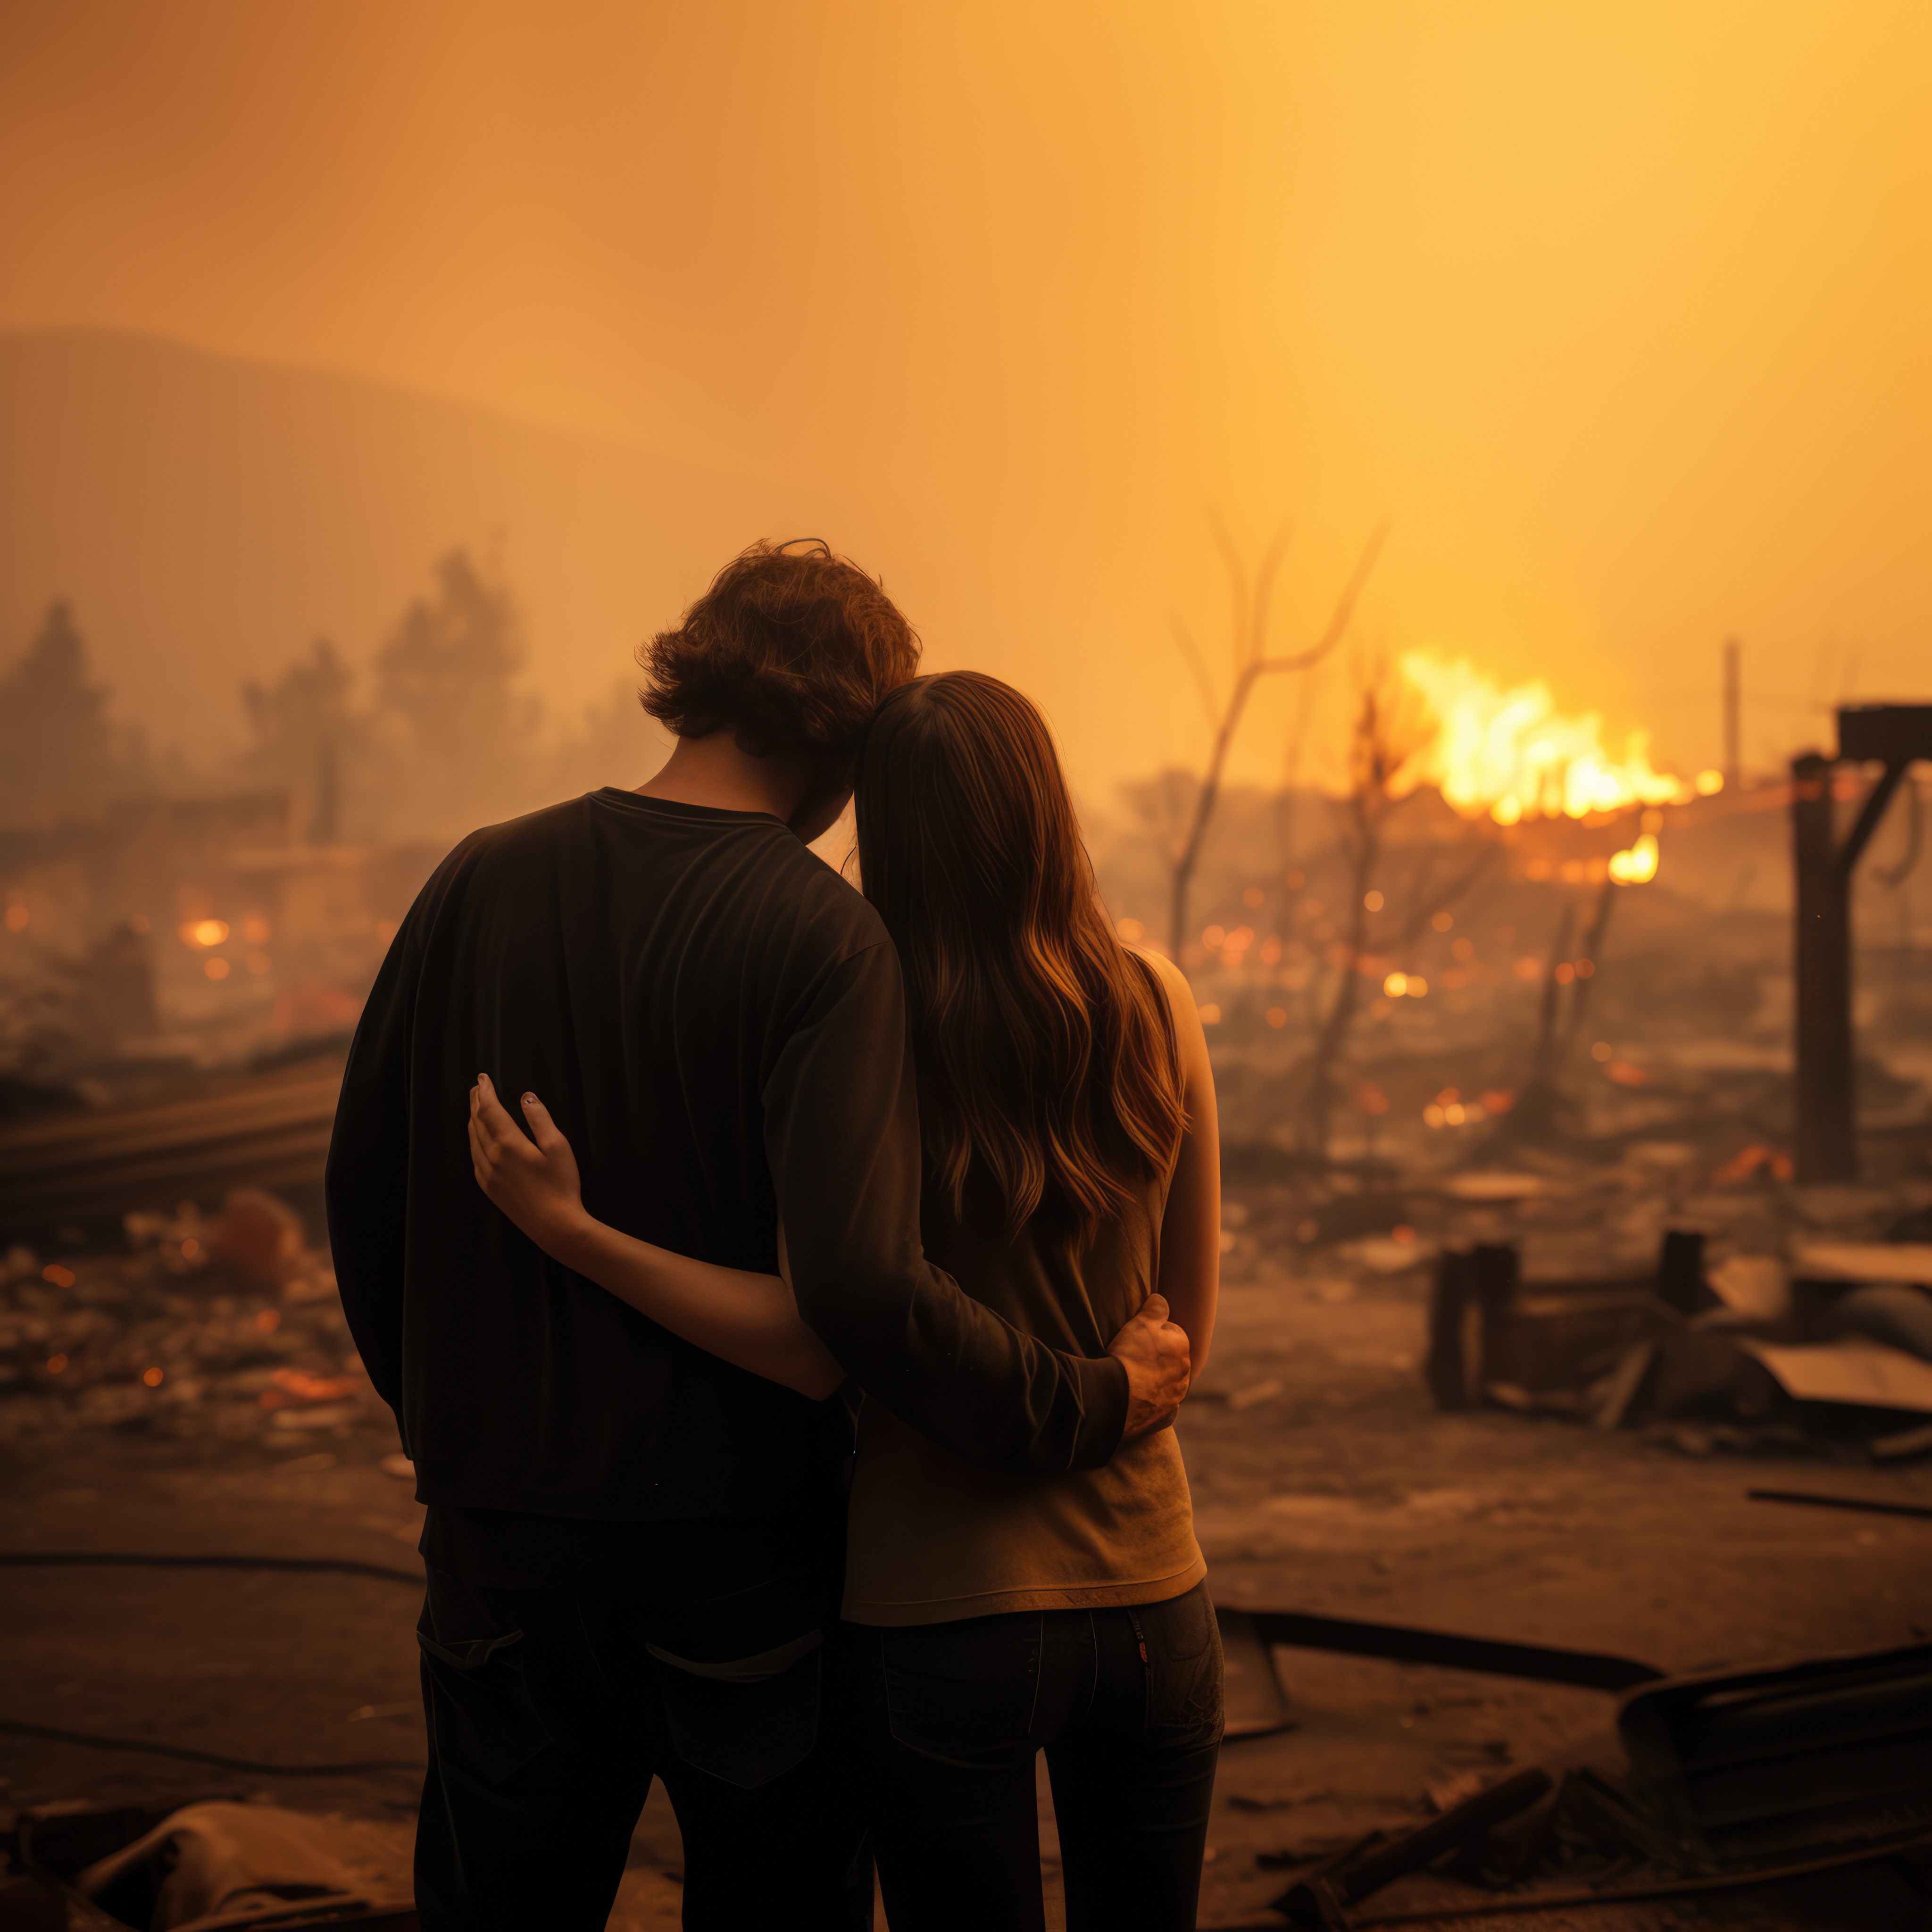 A couple looks at the rubble after their house burned down. For illustration purposes only | Source: Freepik